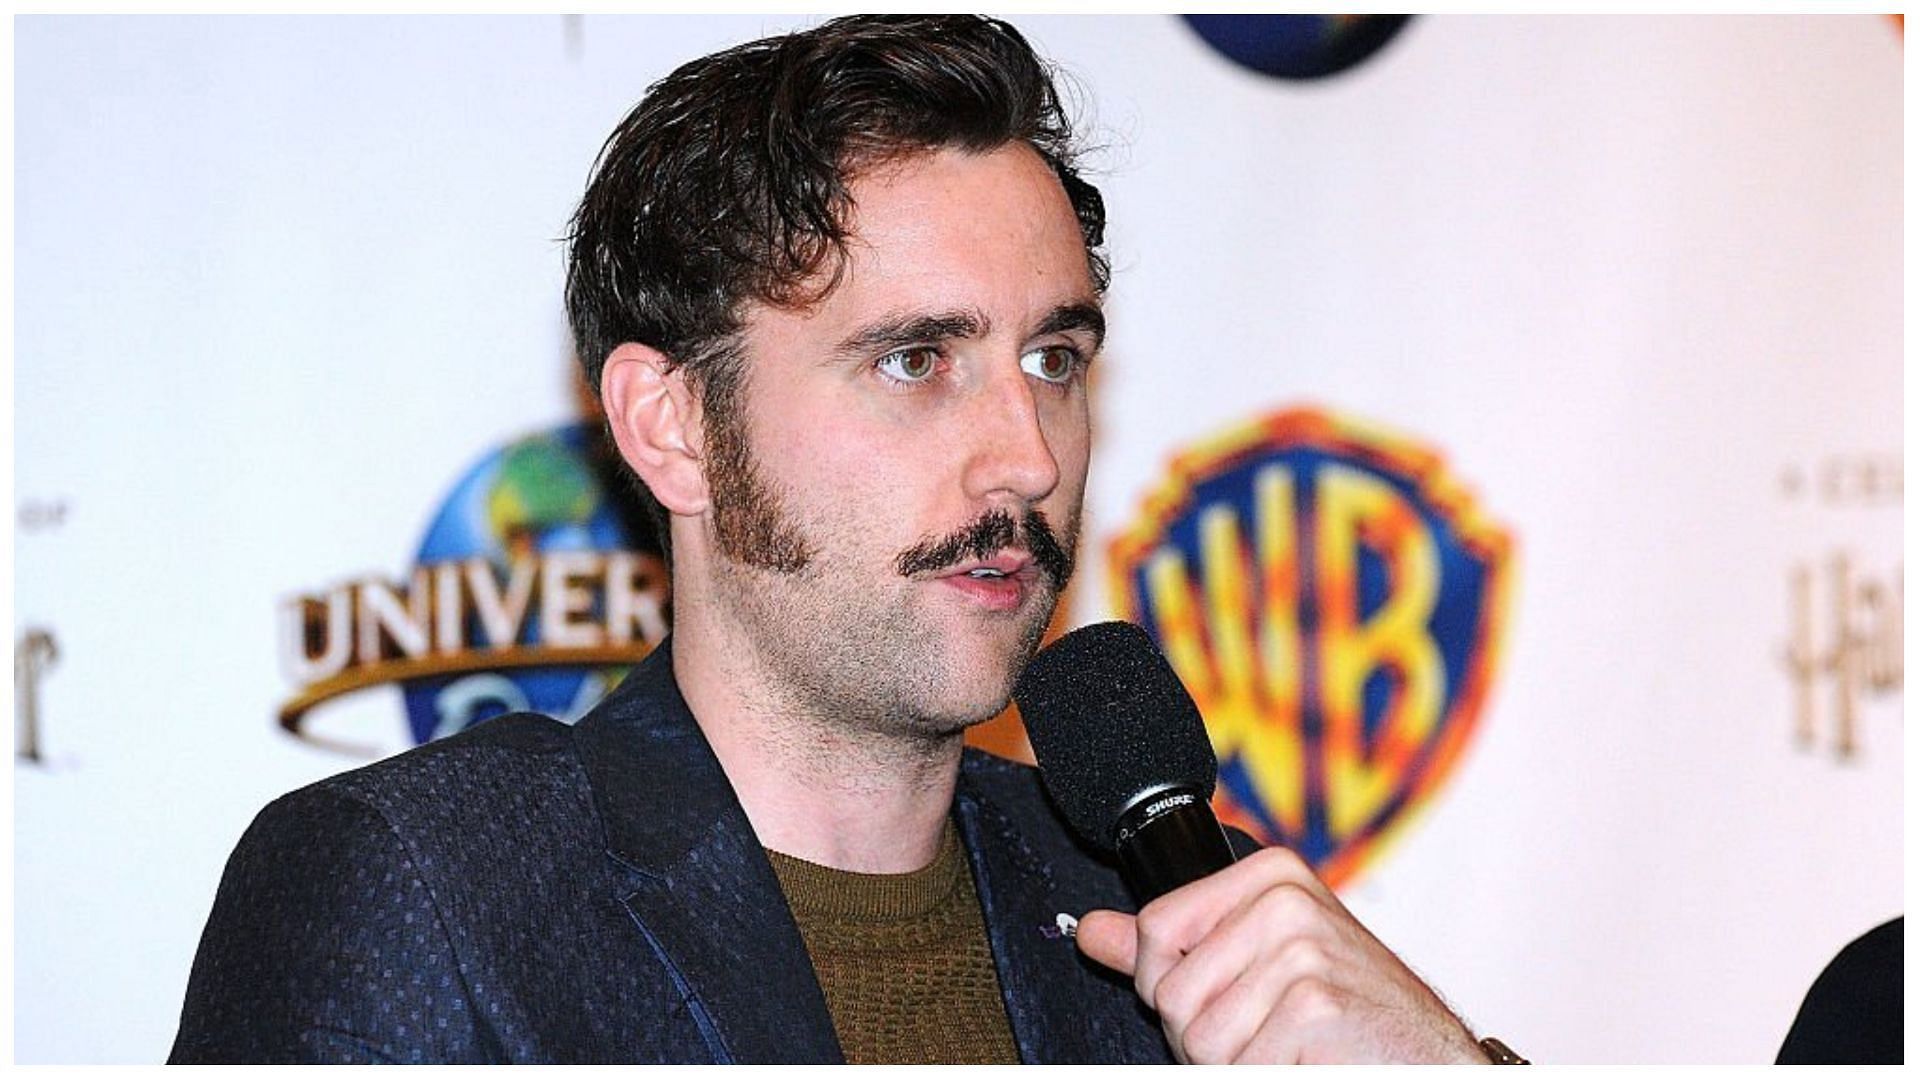 Matthew Lewis is mostly known for his appearance in the Harry Potter franchise (Image via Gerardo Mora/Getty Images)